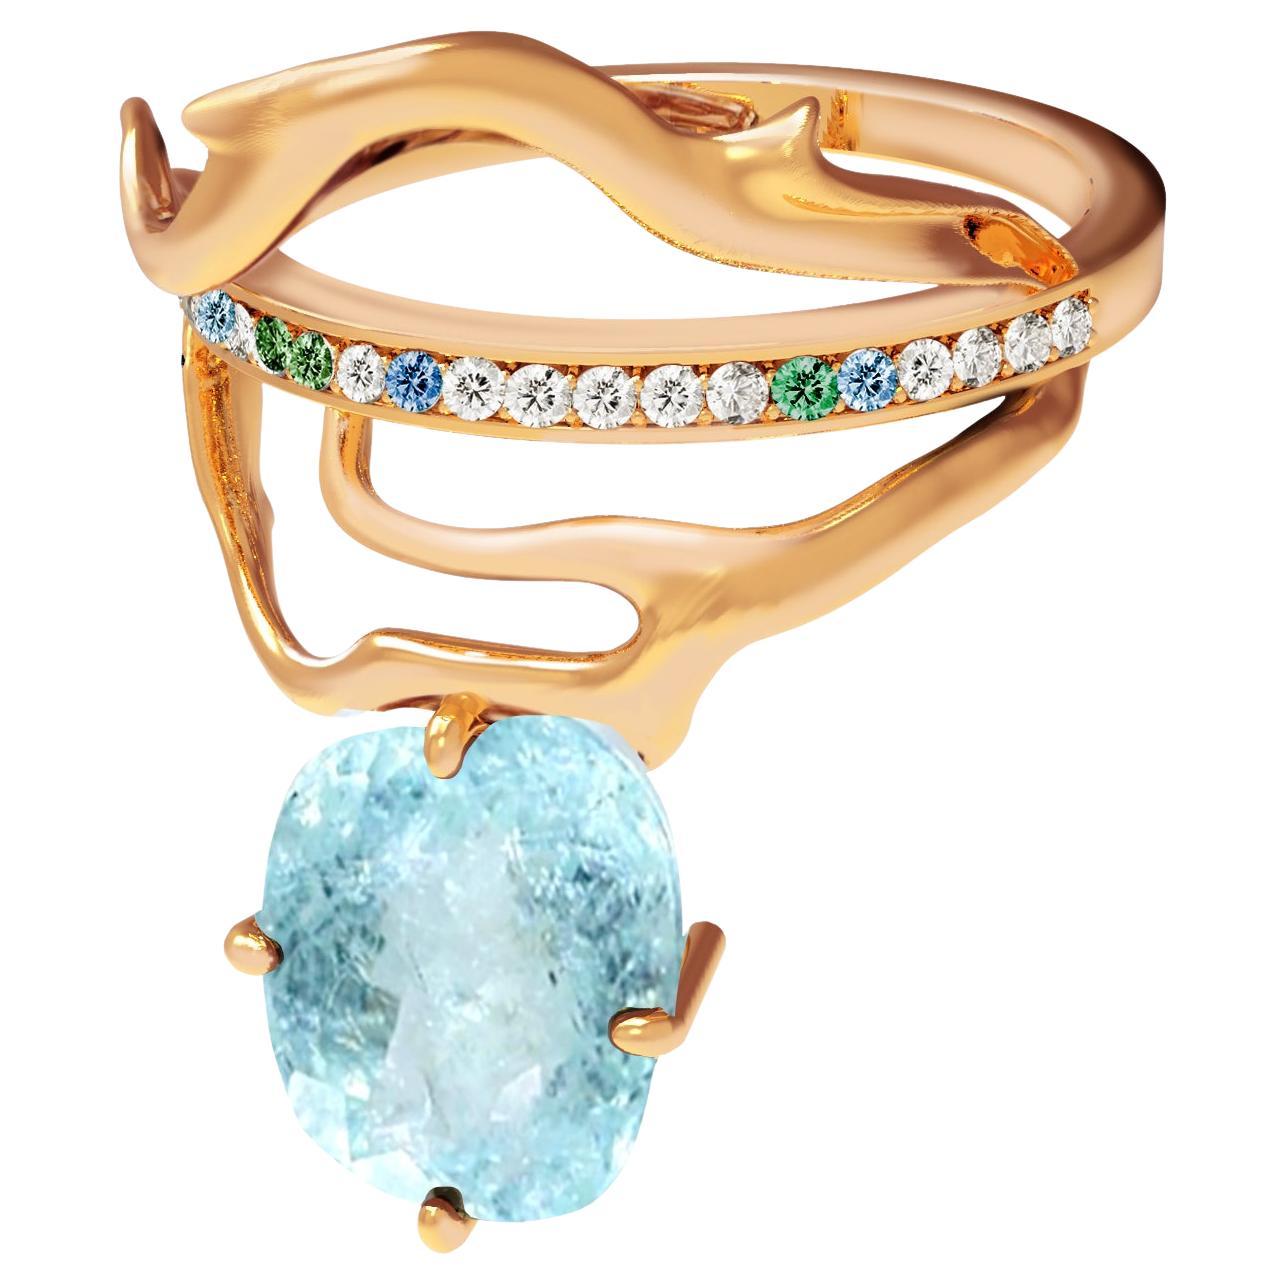 Women's 18 Karat Yellow or Rose Gold Fashion Ring with Paraiba Tourmaline and Diamonds For Sale